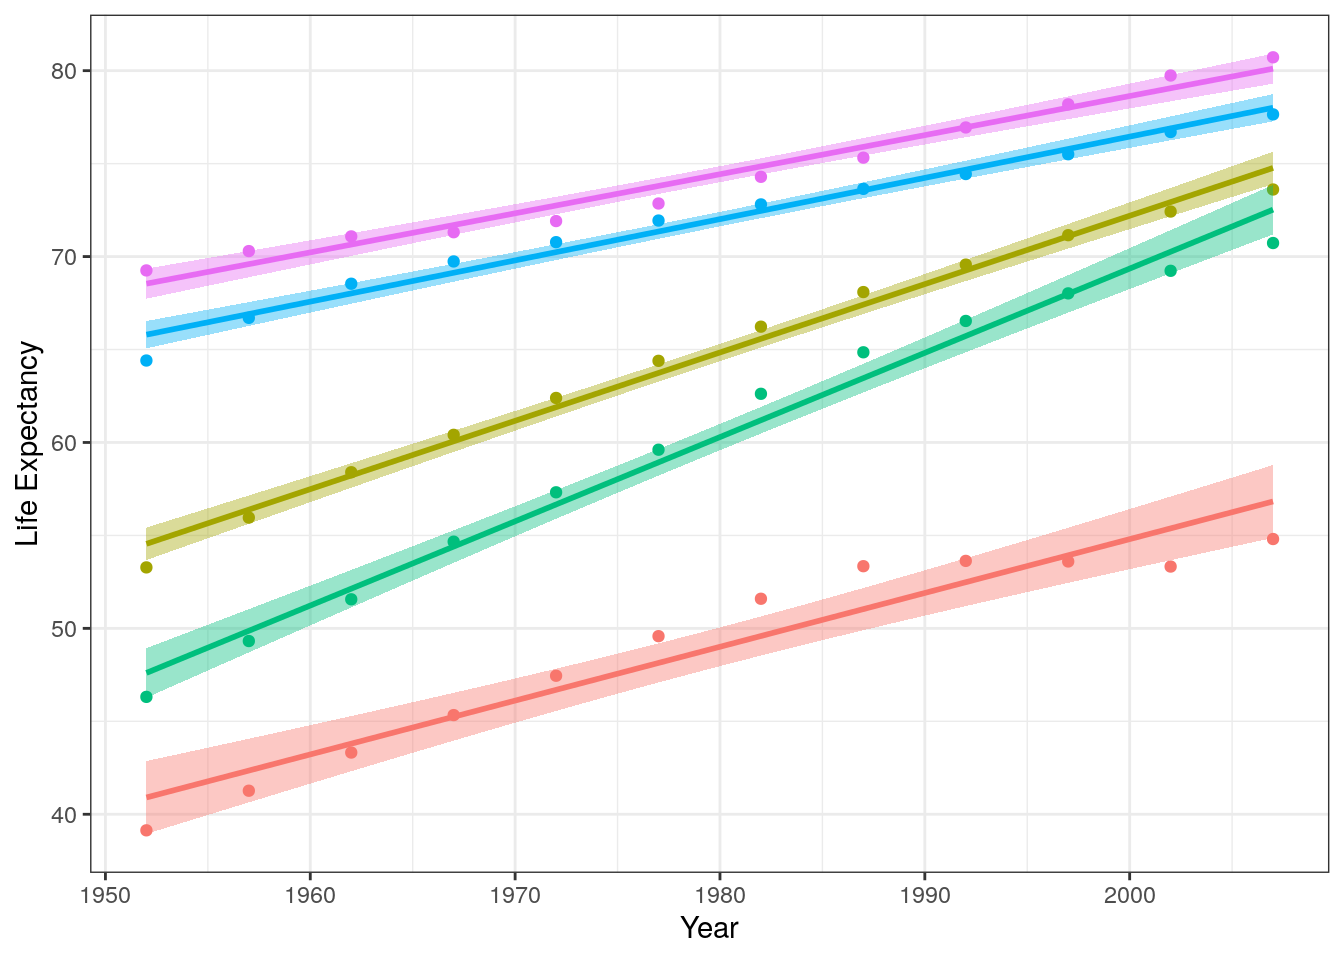 Change in life expectancy for various continents (shown as separate colours) as a function of year.